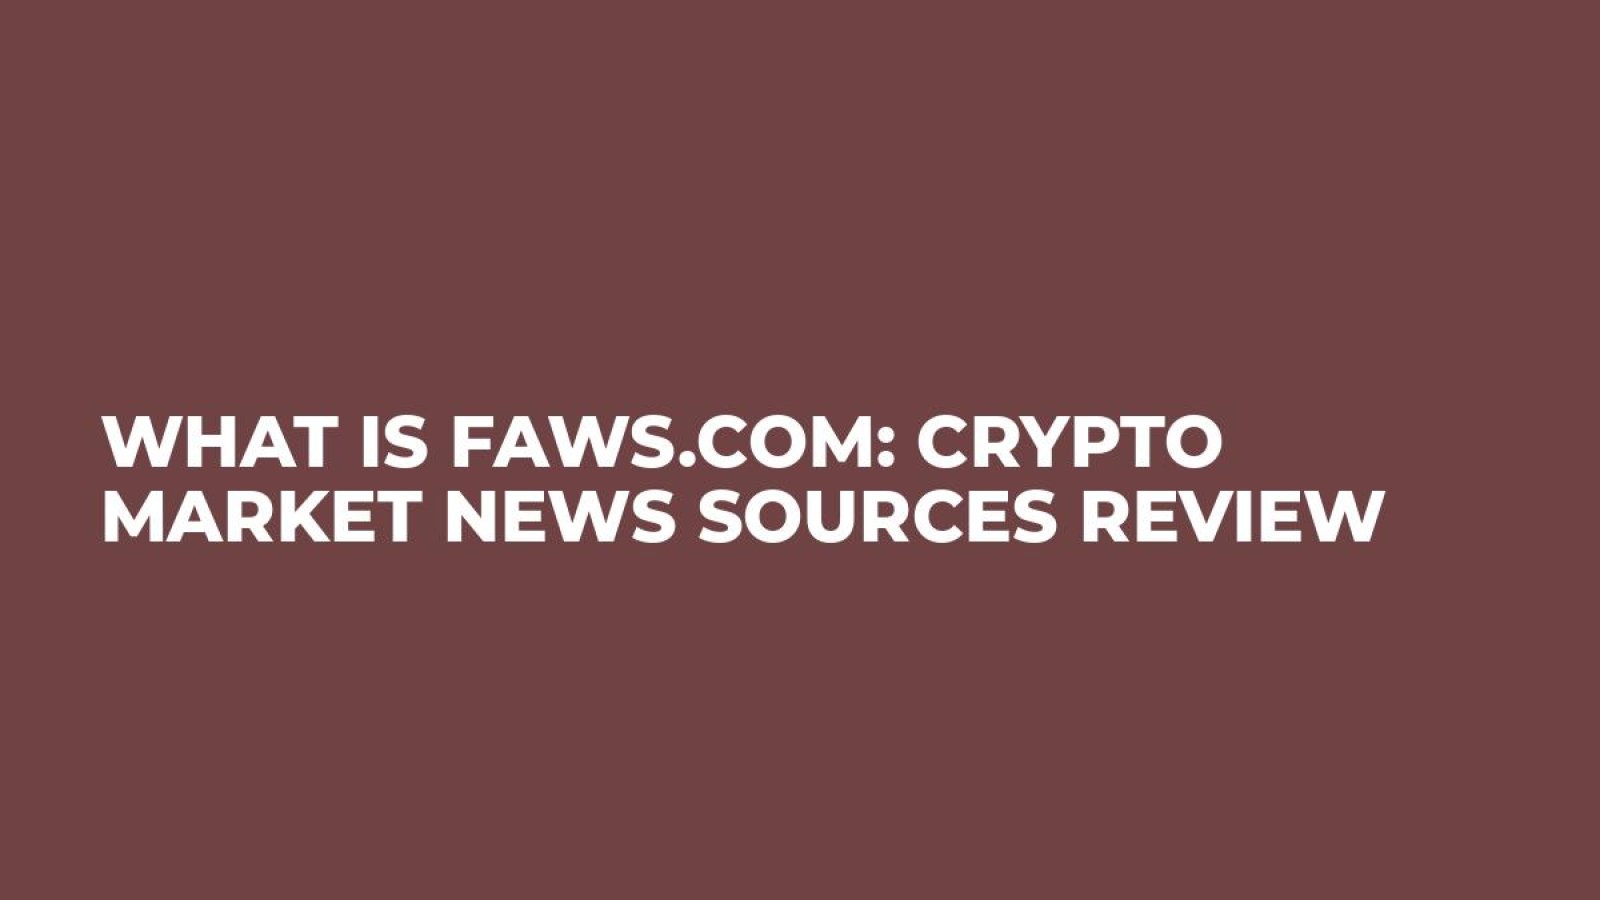 What is Faws.com: Crypto Market News Sources Review